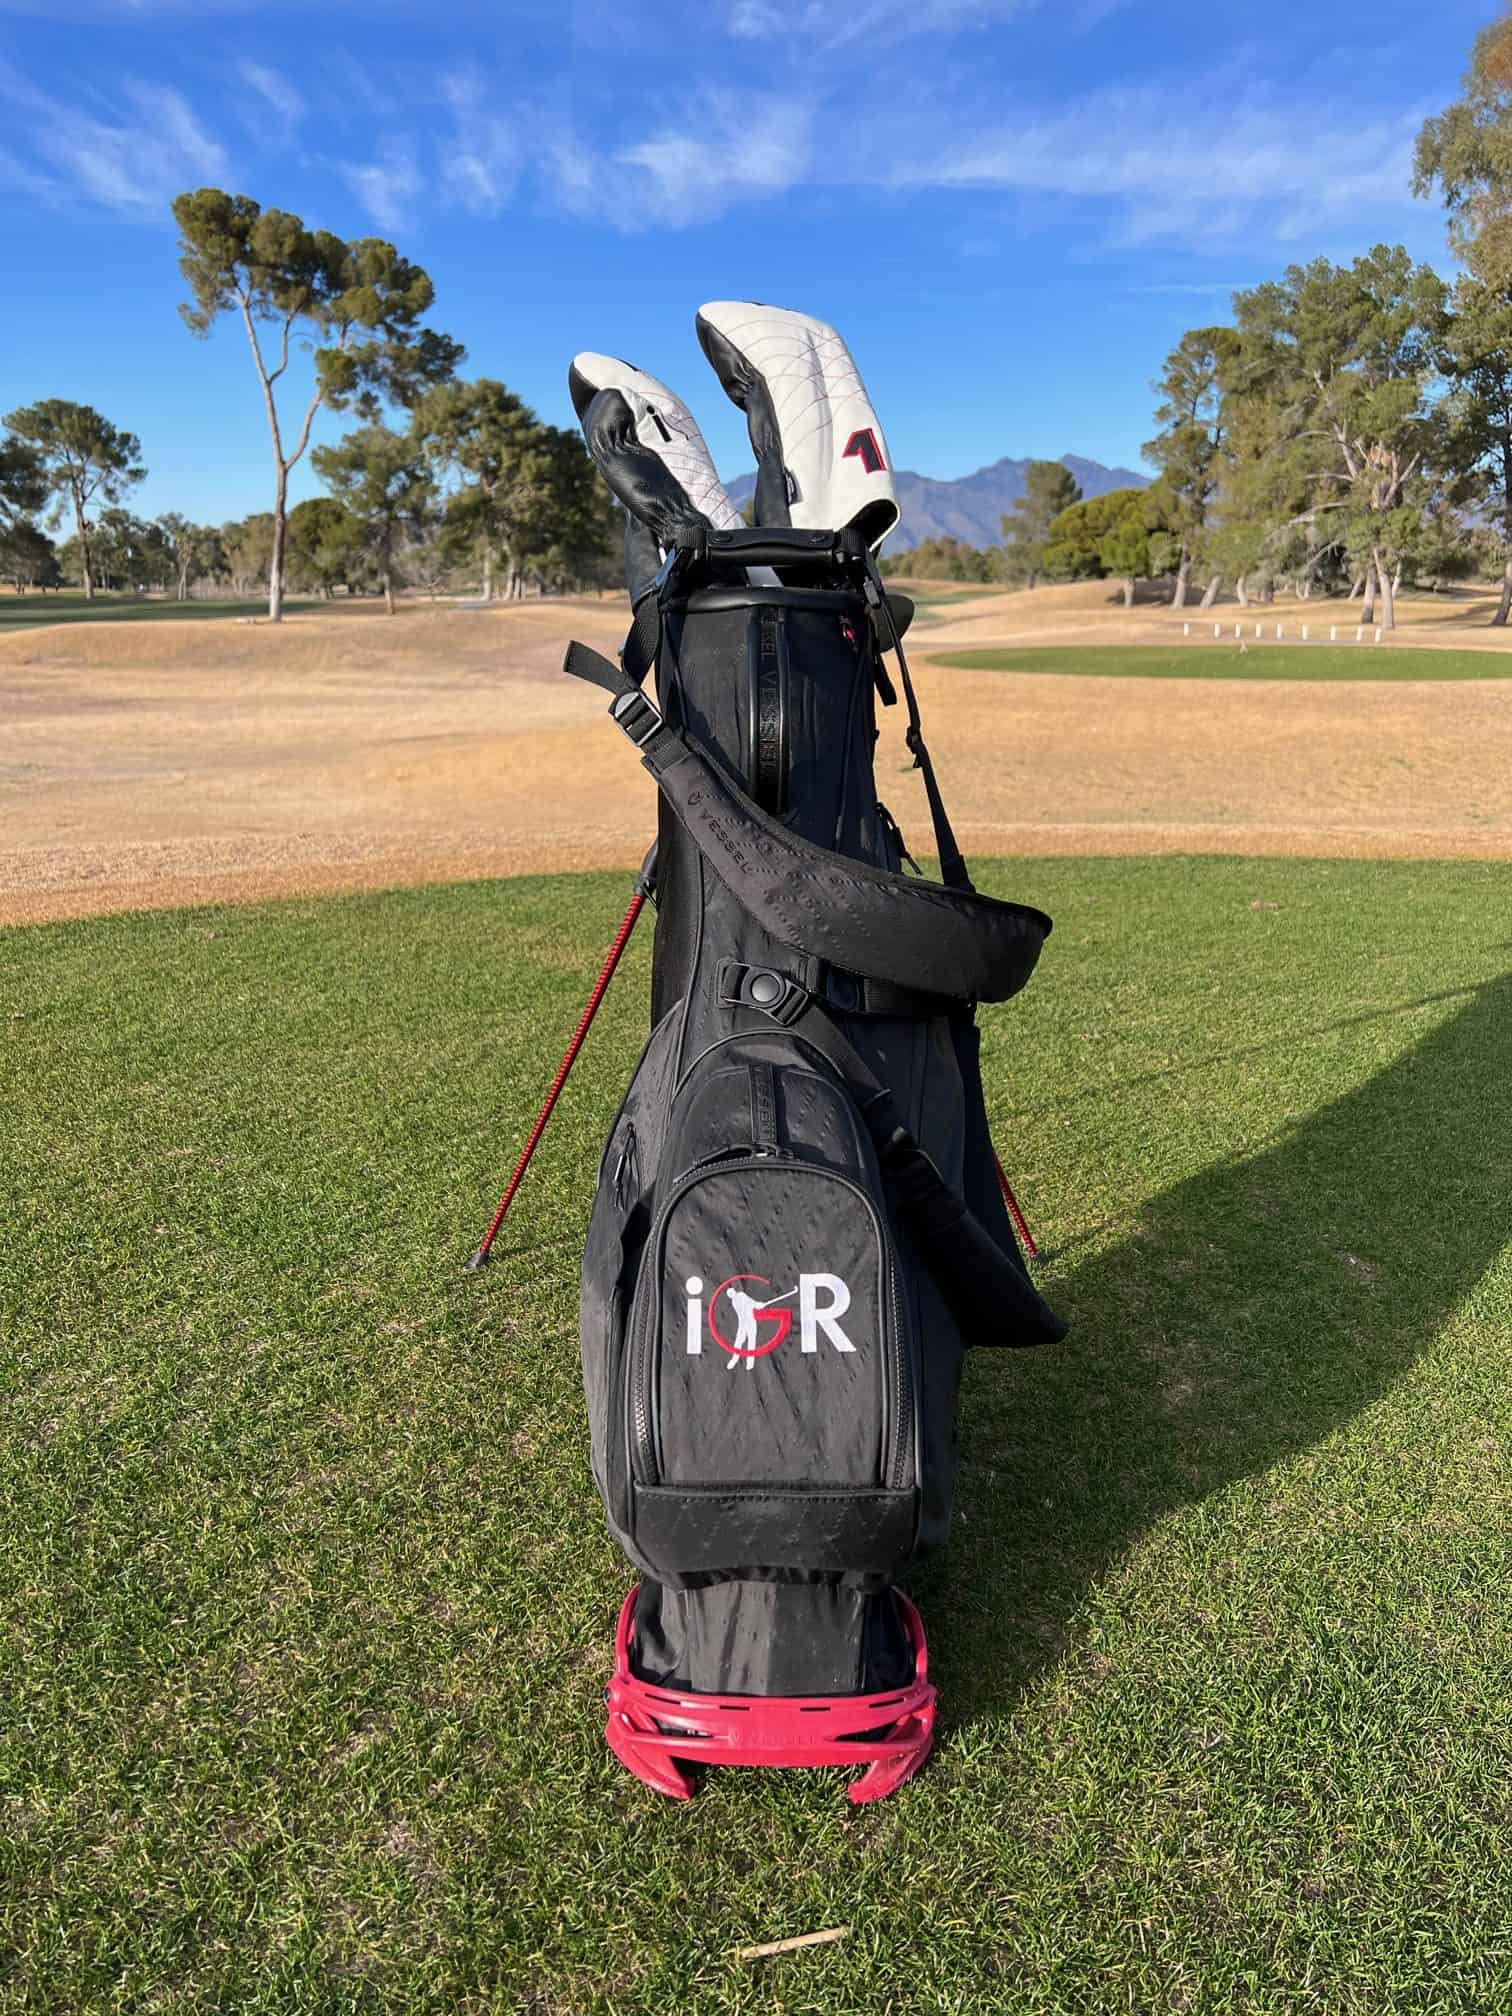 VLS Stand Bags, Lightweight Stand Bags